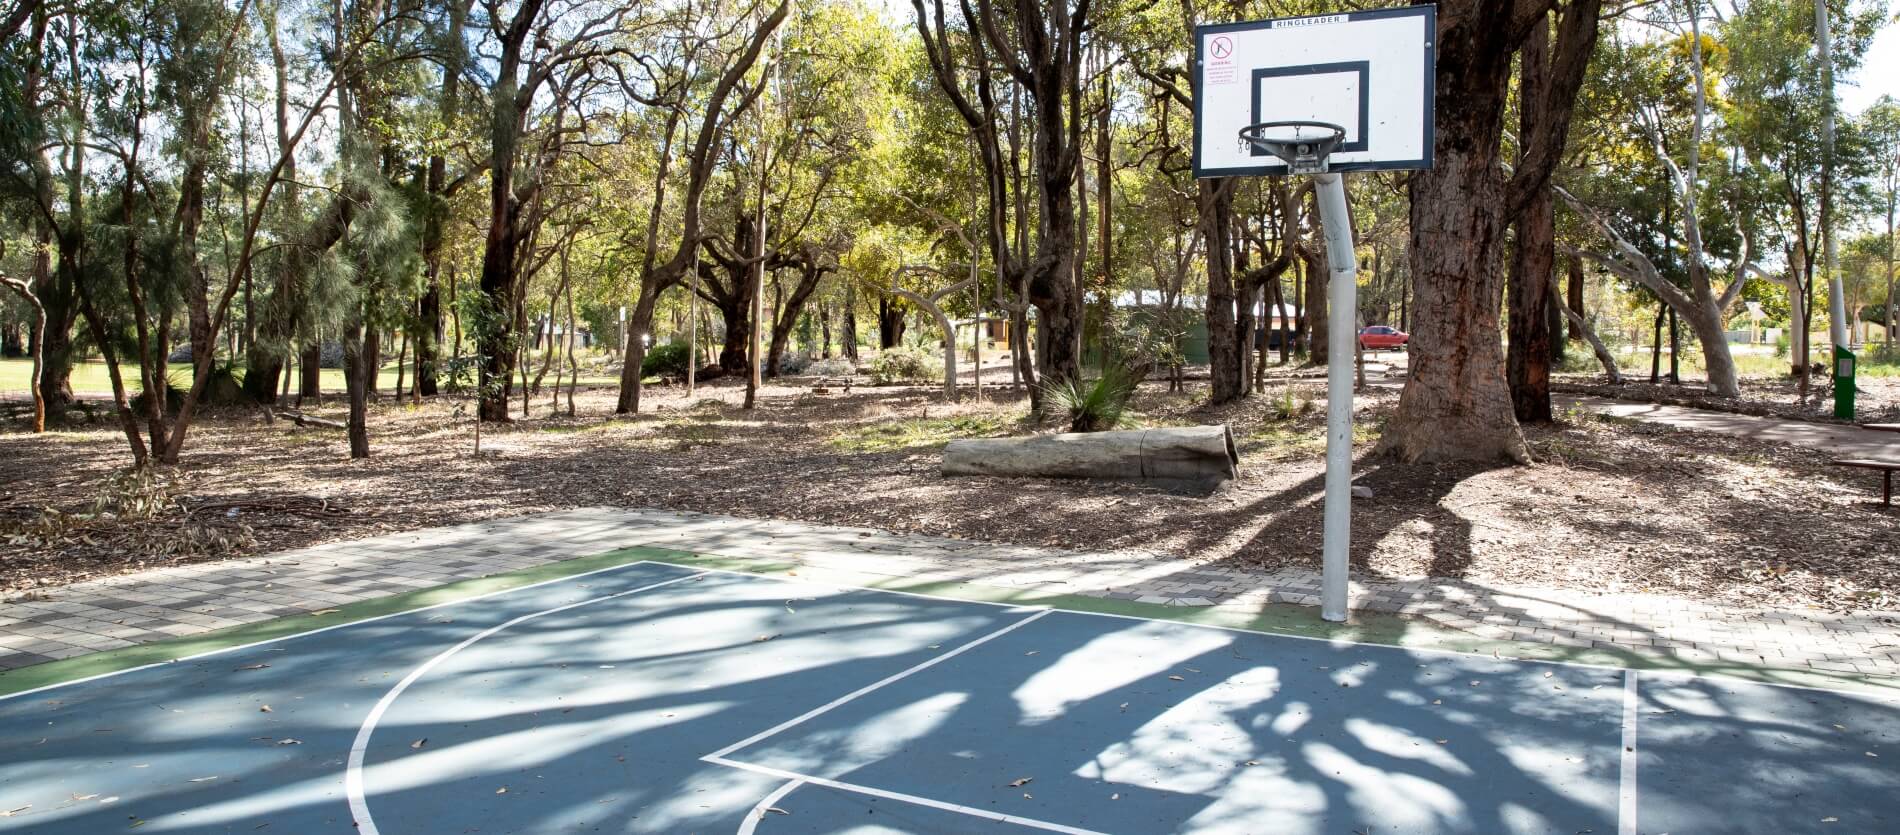 Basketball court at Bill Shaw in Lesmurdie